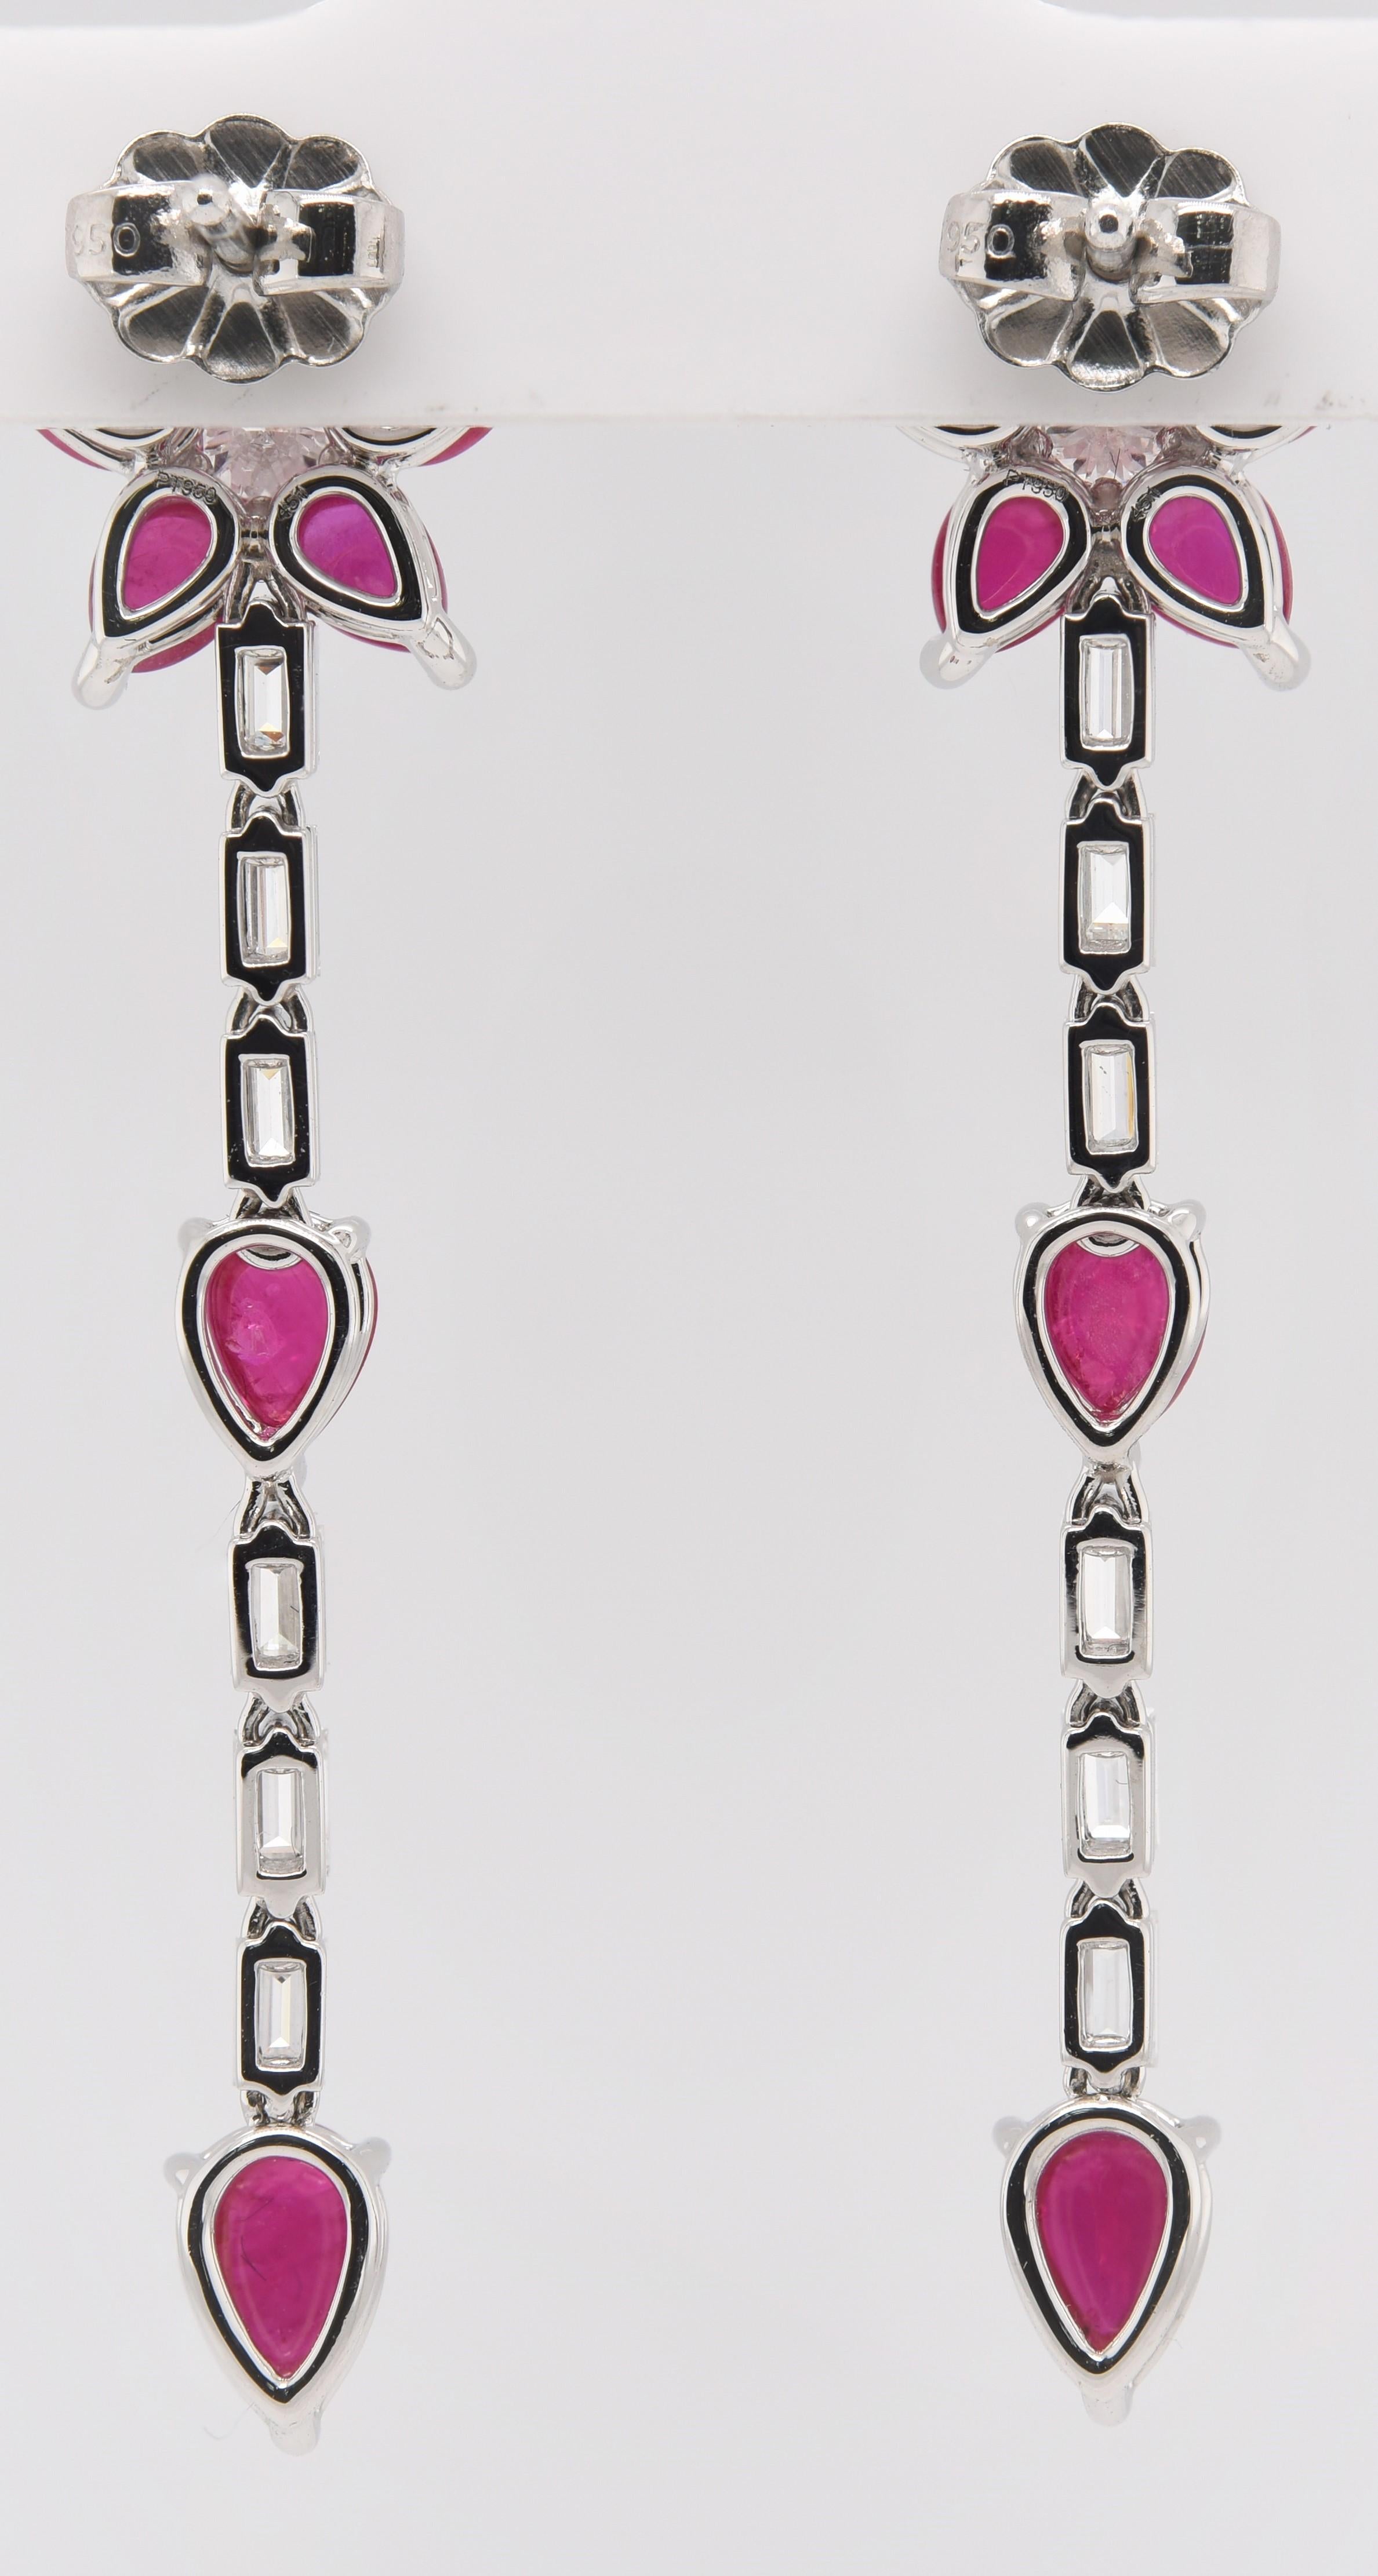 These Cabochon Ruby Earrings are designed as a flower and are surrounded with diamonds which drop to linear pear shaped cabochon rubies. With 4.20 carats in Rubies and 1.15 carats in Diamonds these earrings are 5.33 in total carat weight all mounted